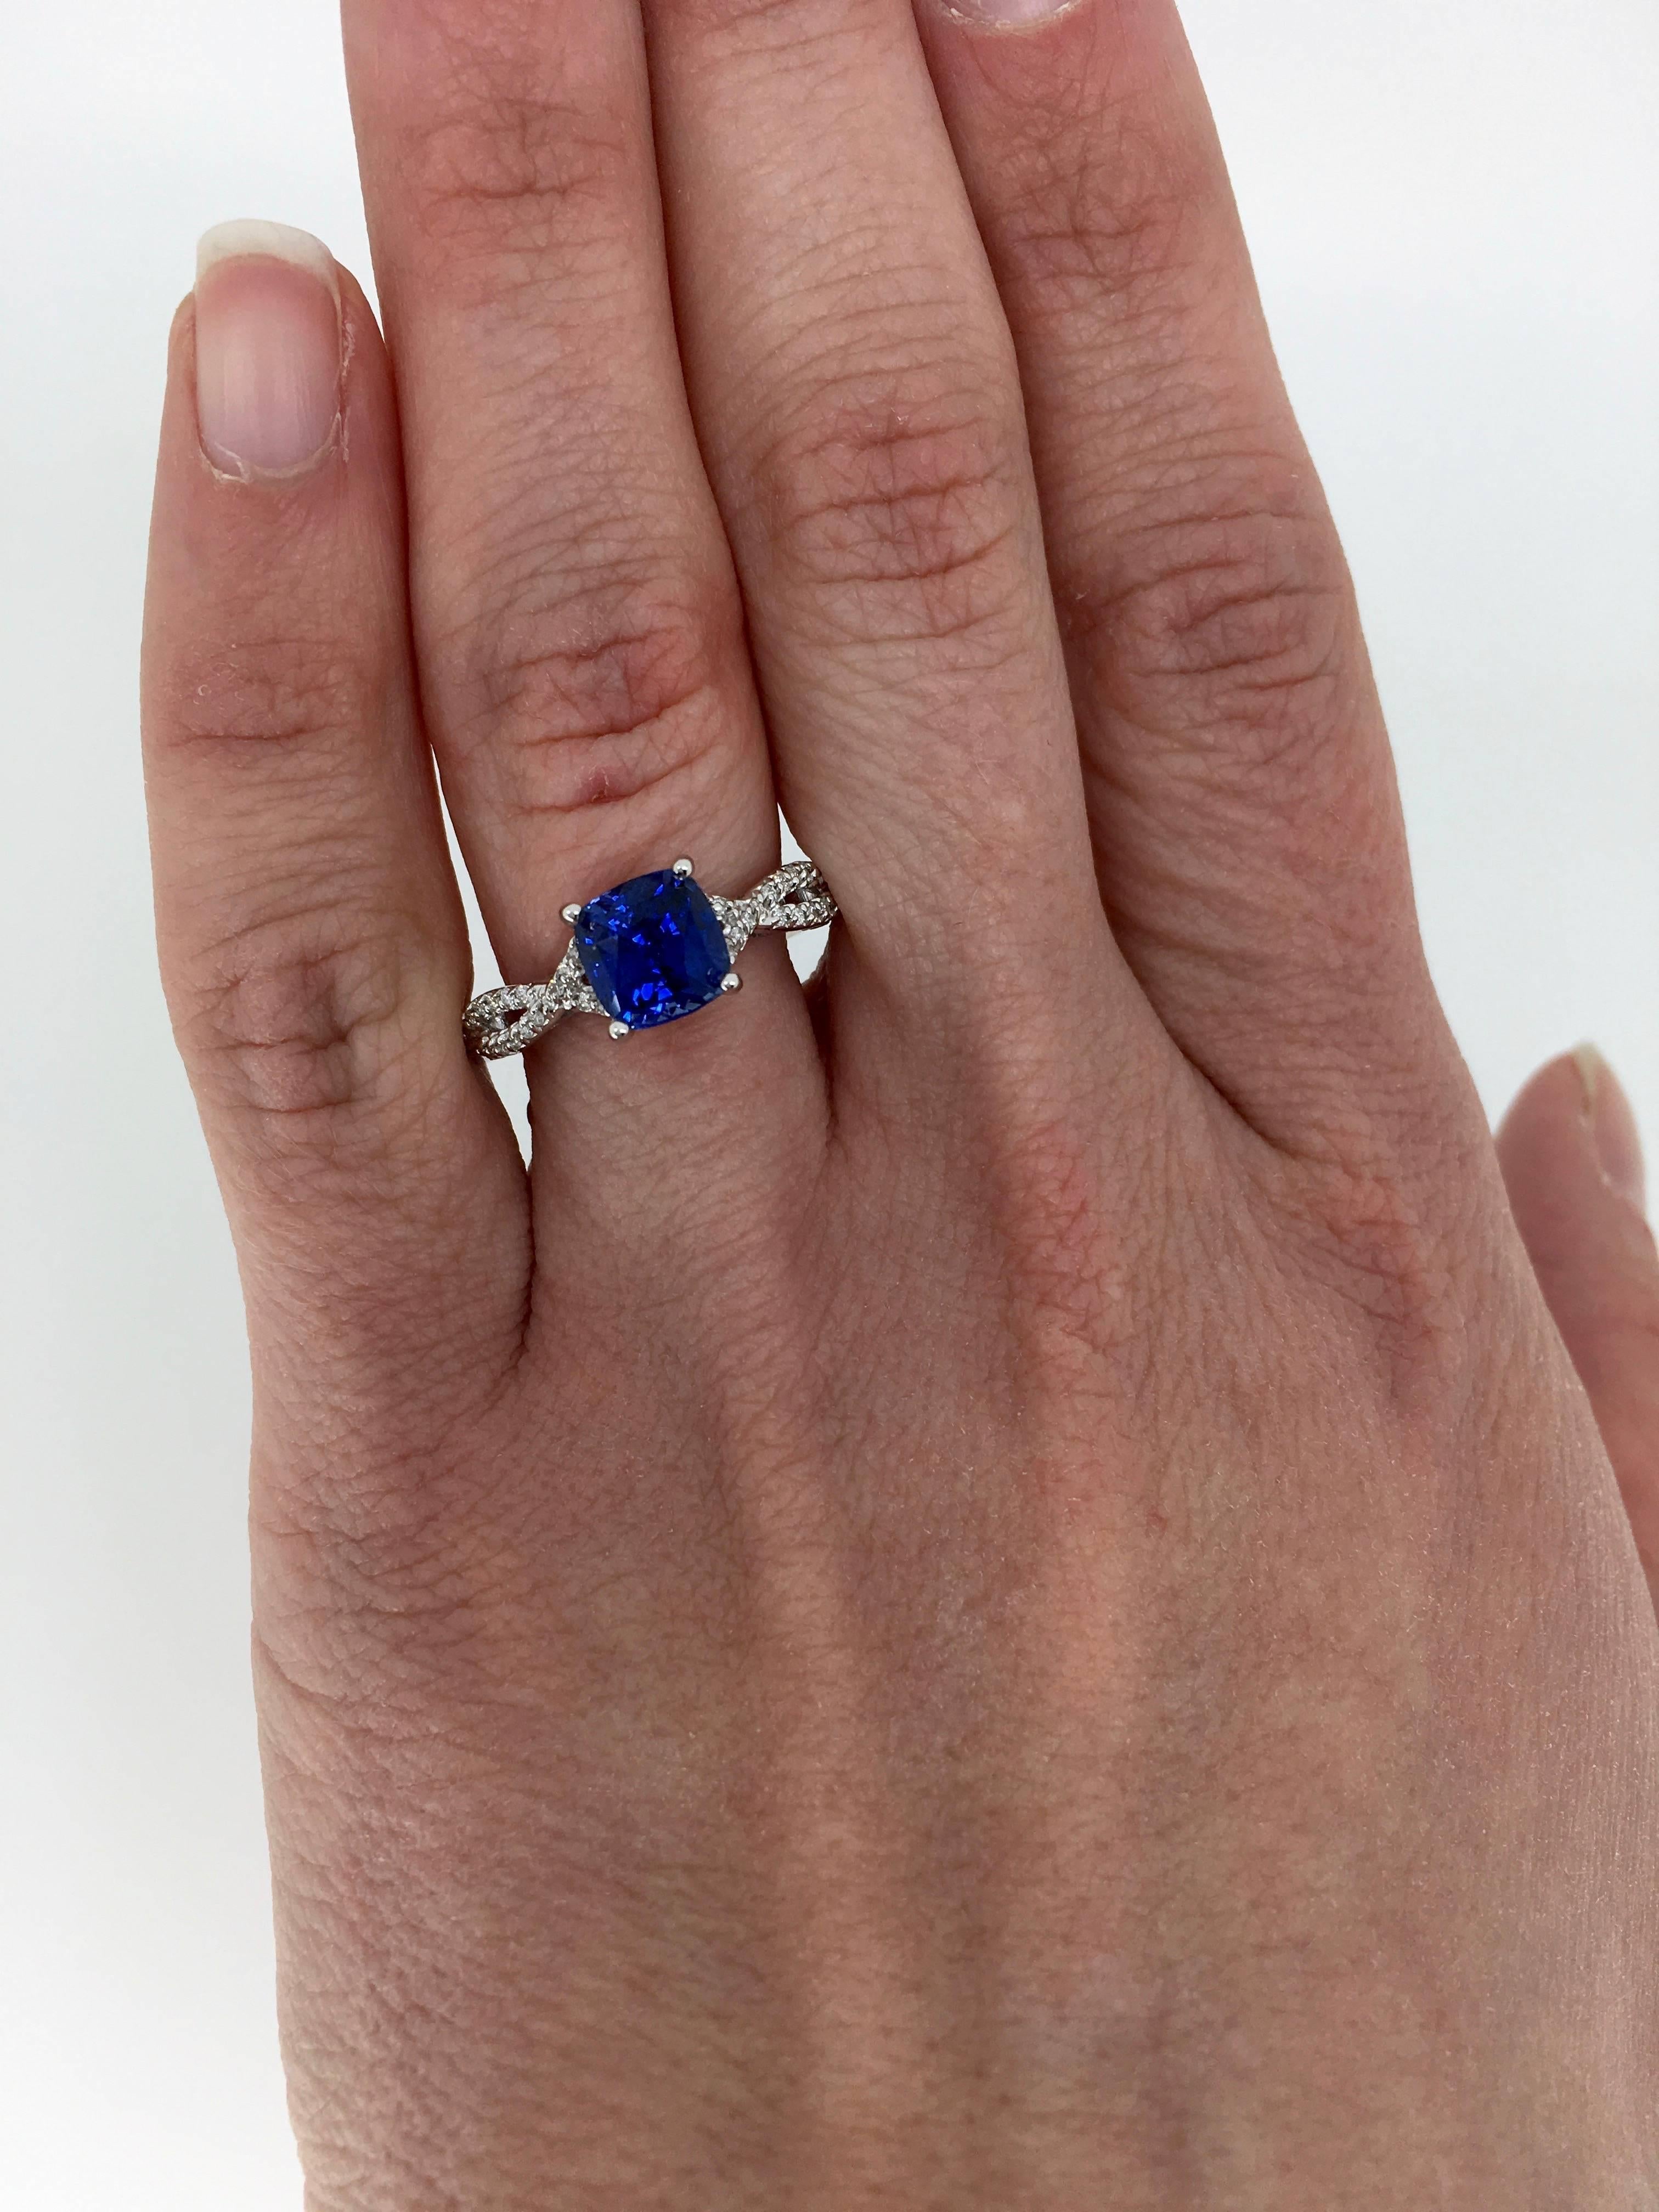 Beautiful engagement ring features a GIA and UGL Certified 2.18CT Cushion Cut Blue Sapphire. The color of the Sapphire is a stunning velvety blue color. The elegant twisted shank of the ring has approximately .35CTW of Round Brilliant Cut Diamonds.